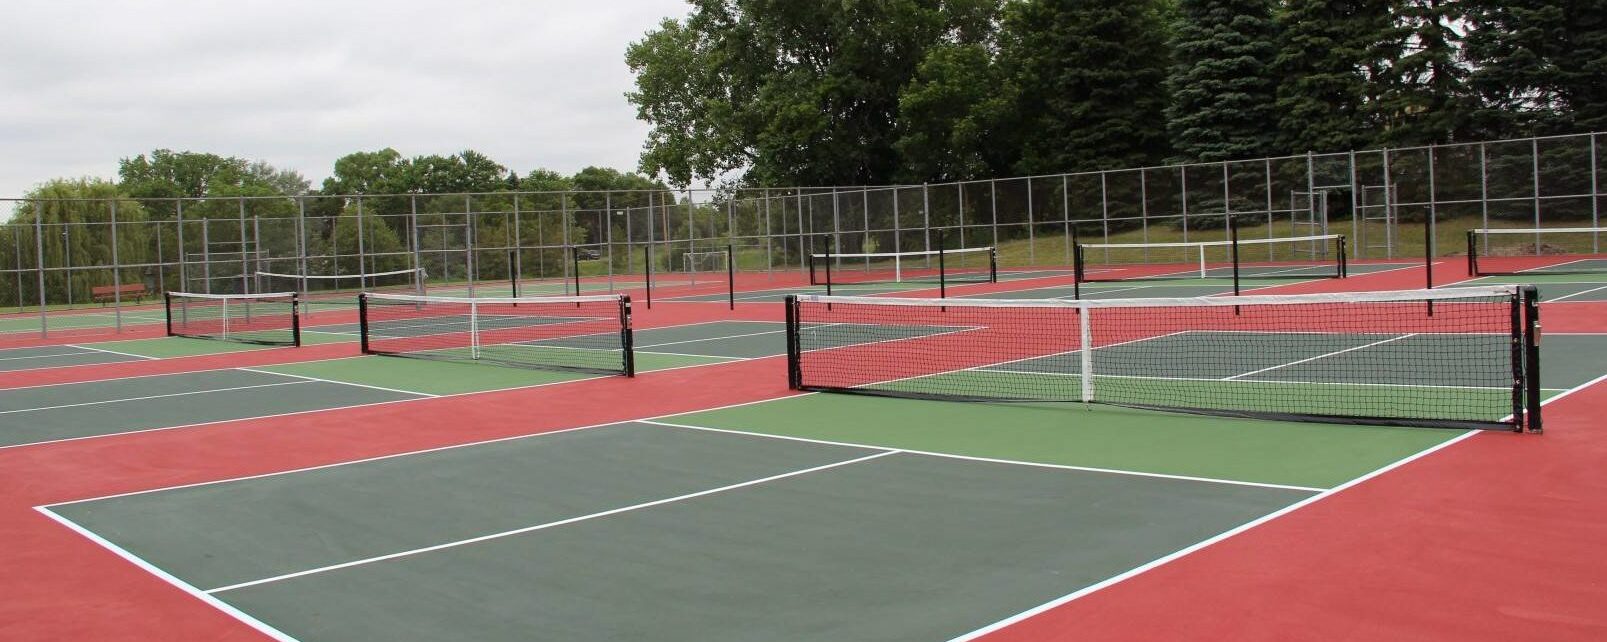 Pickleball Courts at Bobby Theisen Park